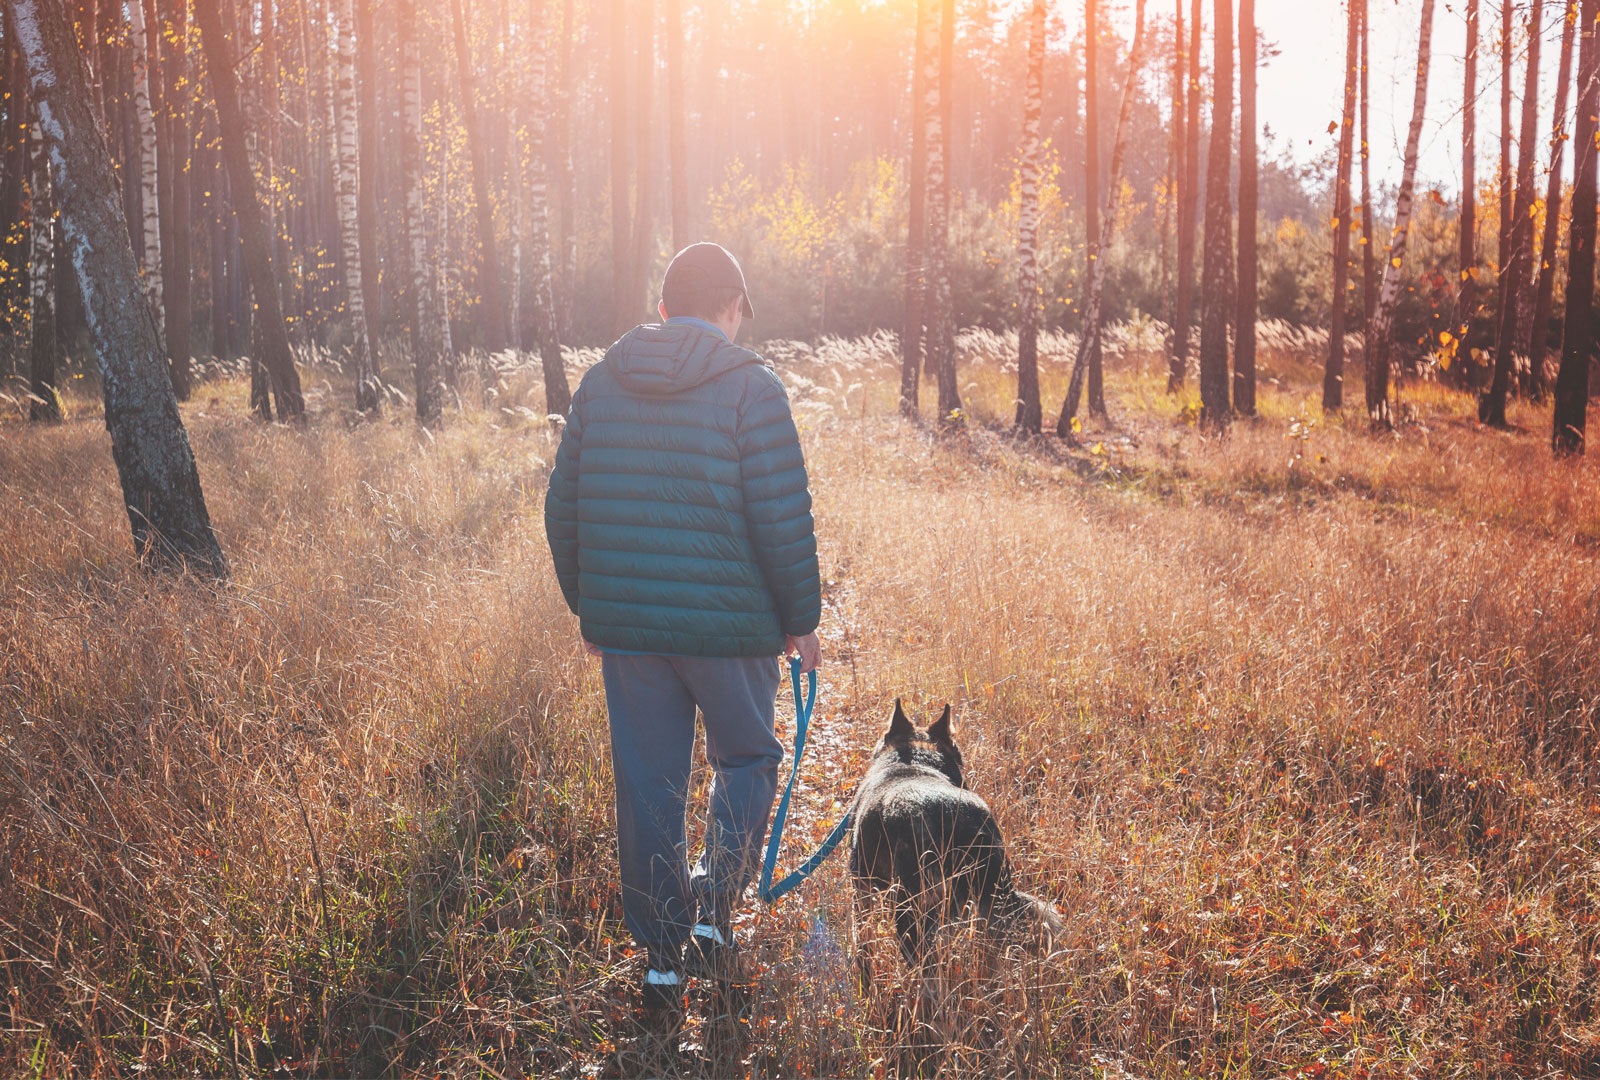 Man walking with a dog in the birch grove at sunset in autumn. The man holding a dog on a leash